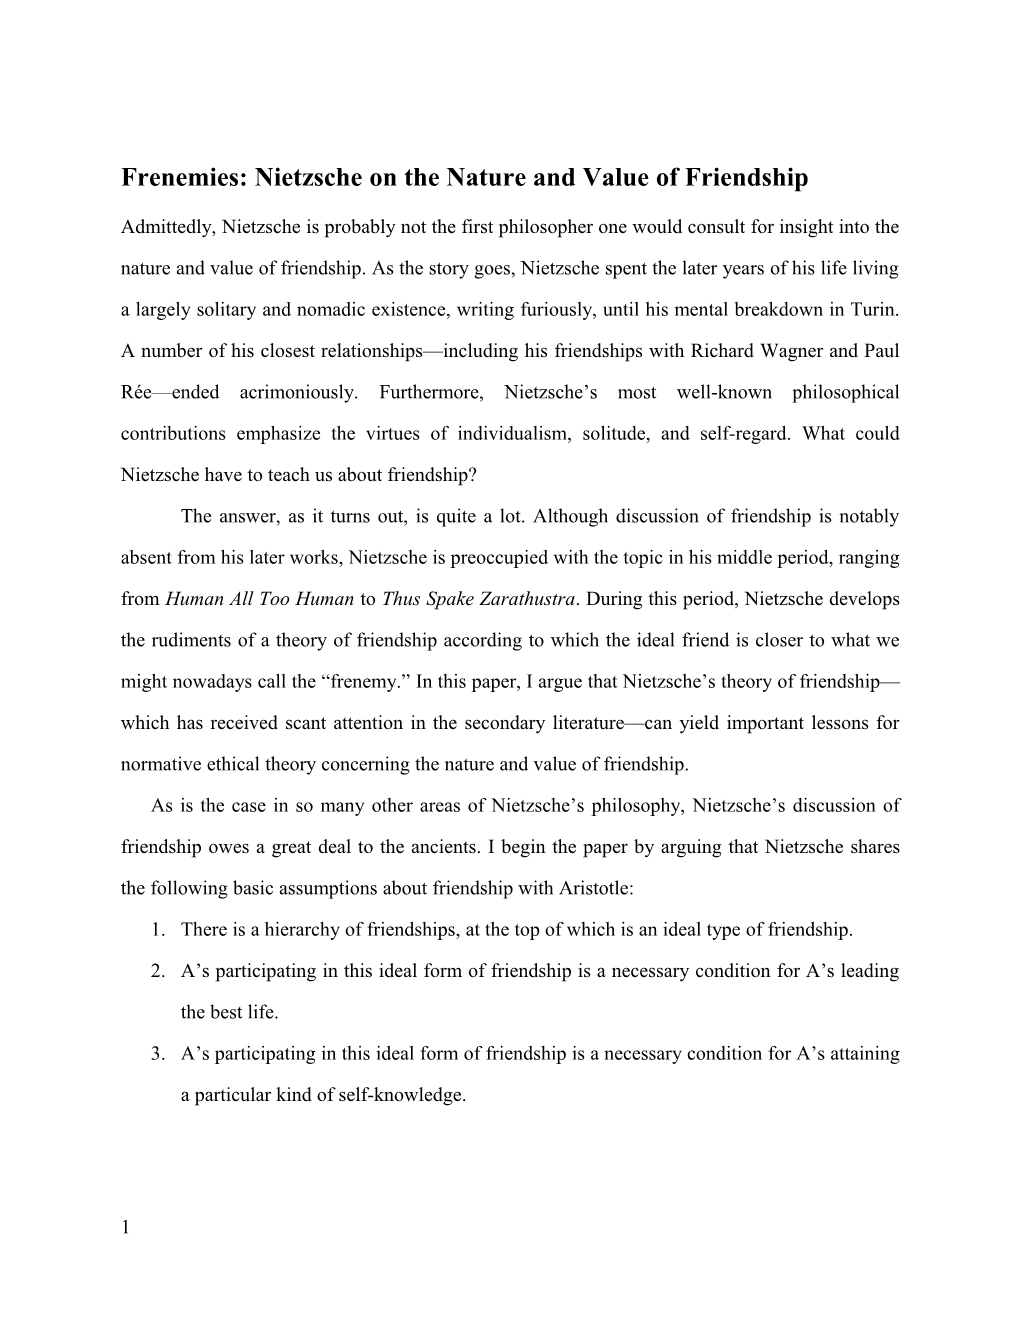 Frenemies: Nietzsche on the Nature and Value of Friendship